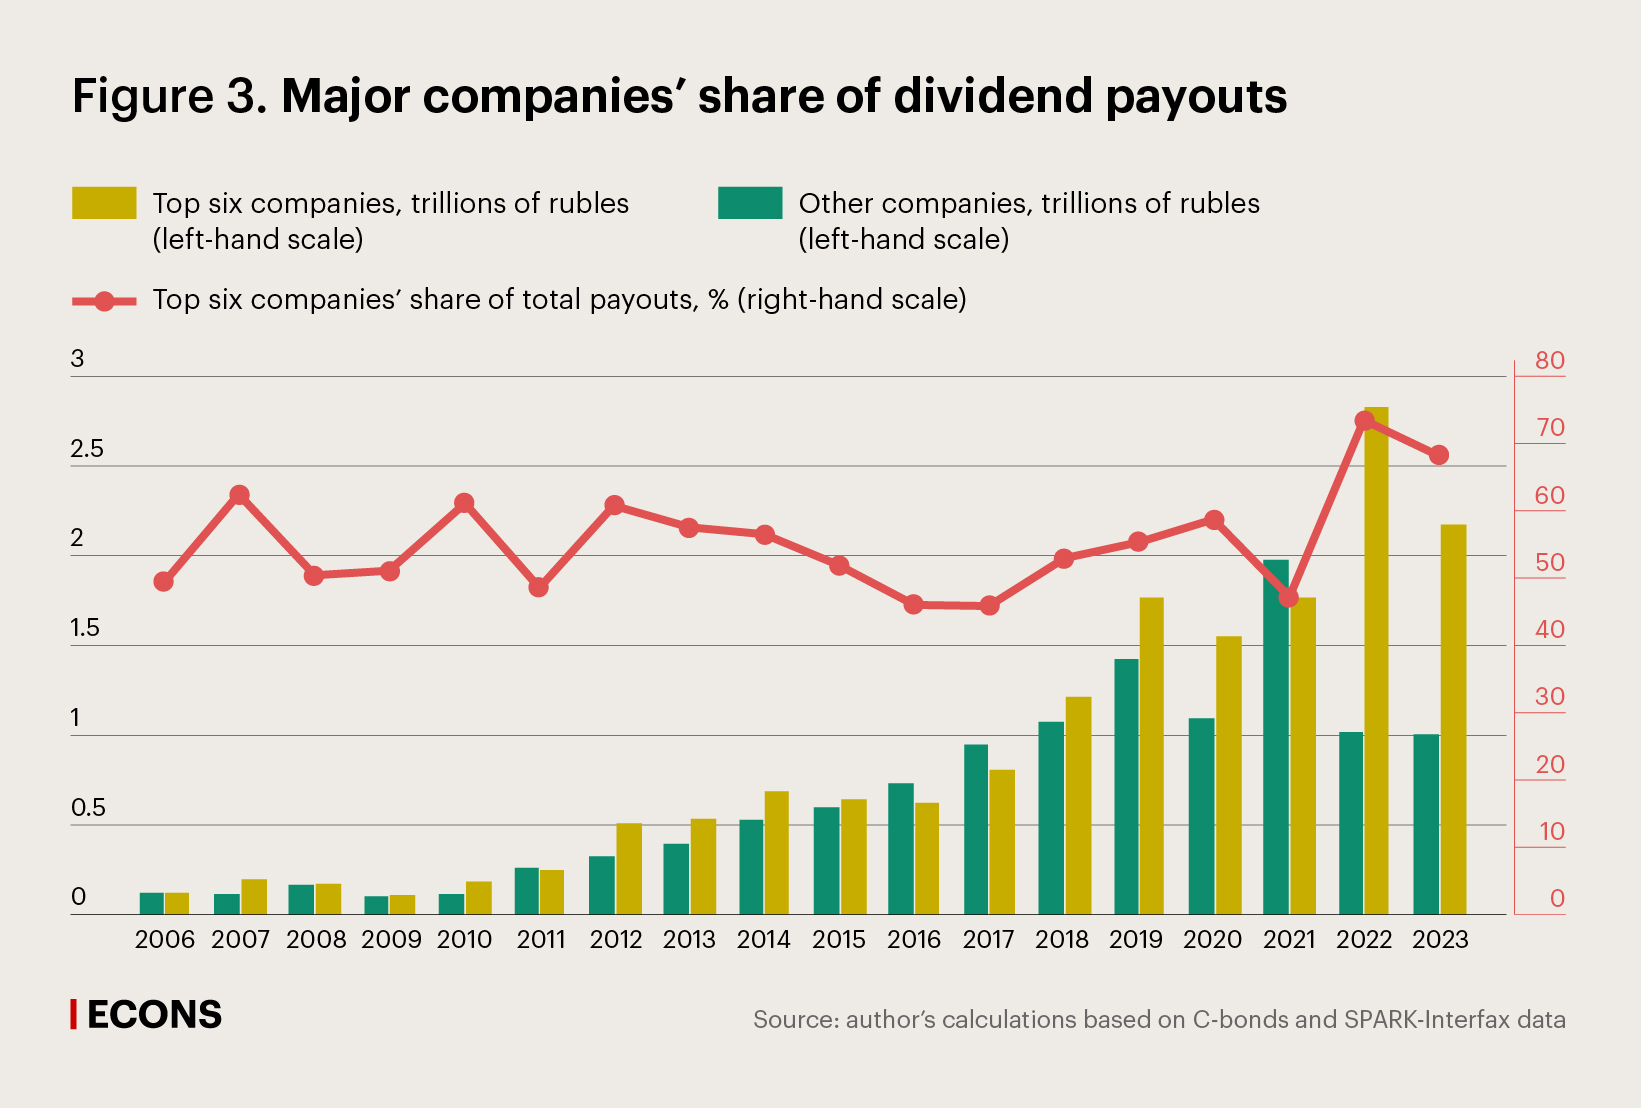 Major companies’ share of dividend payouts